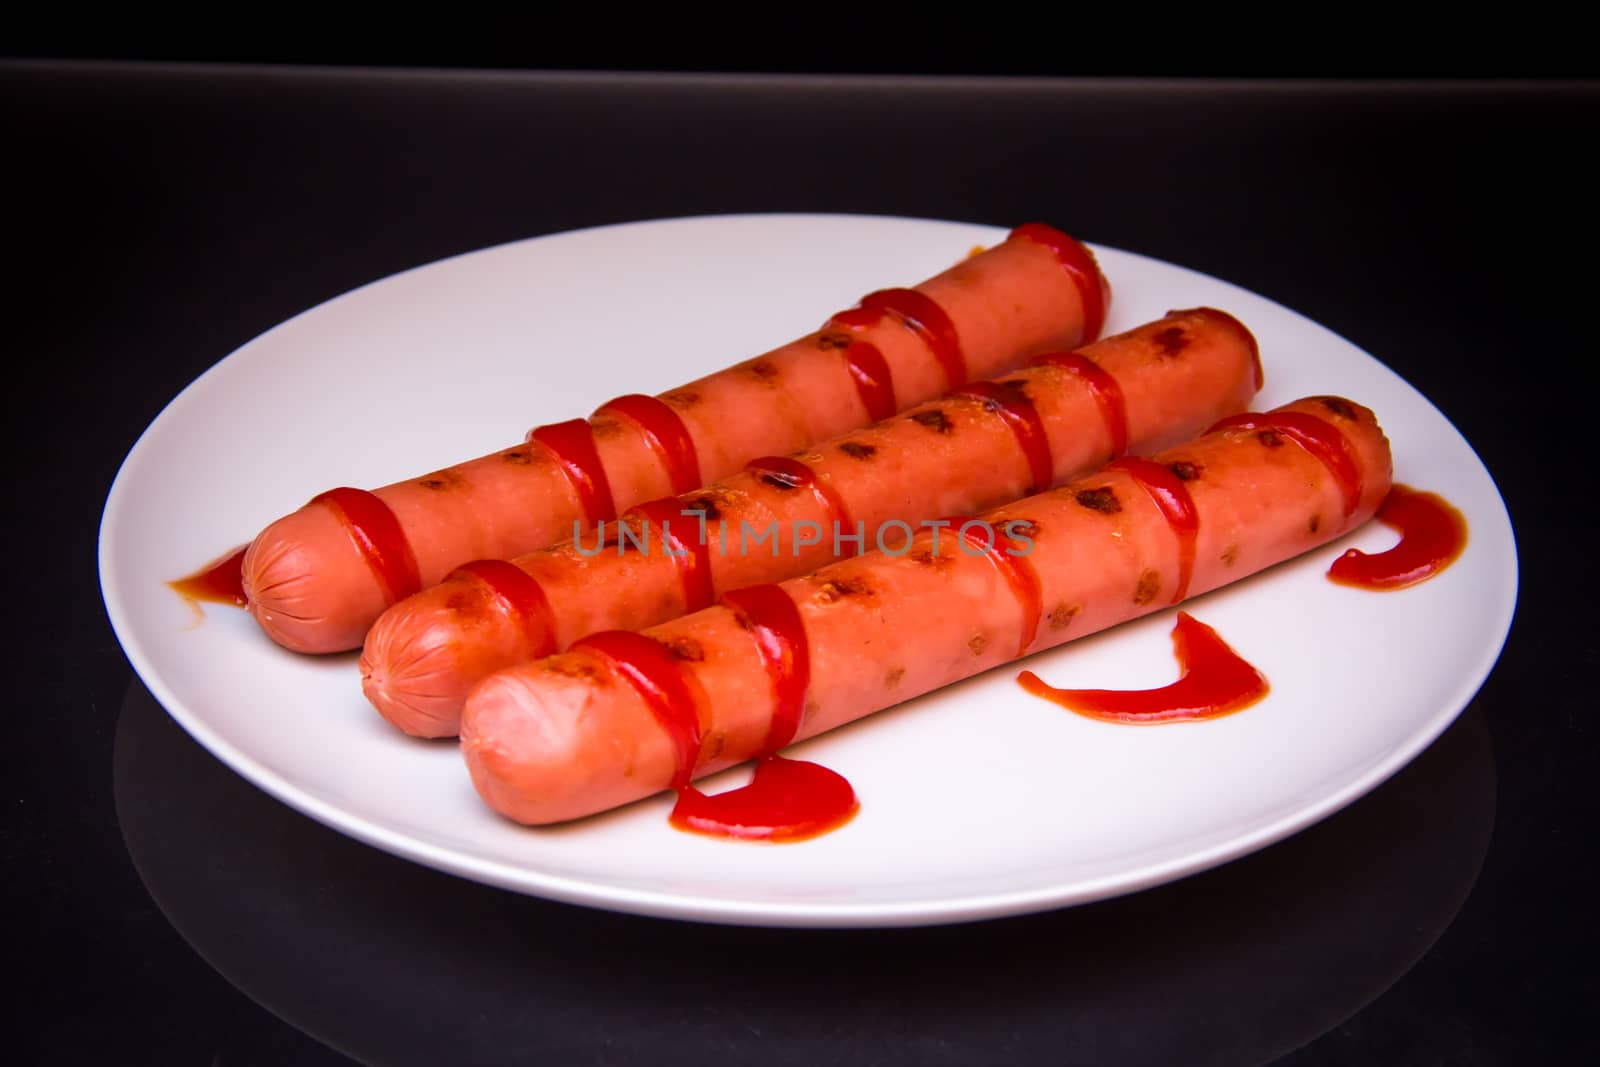 Sausages in tomato sauce on a black background